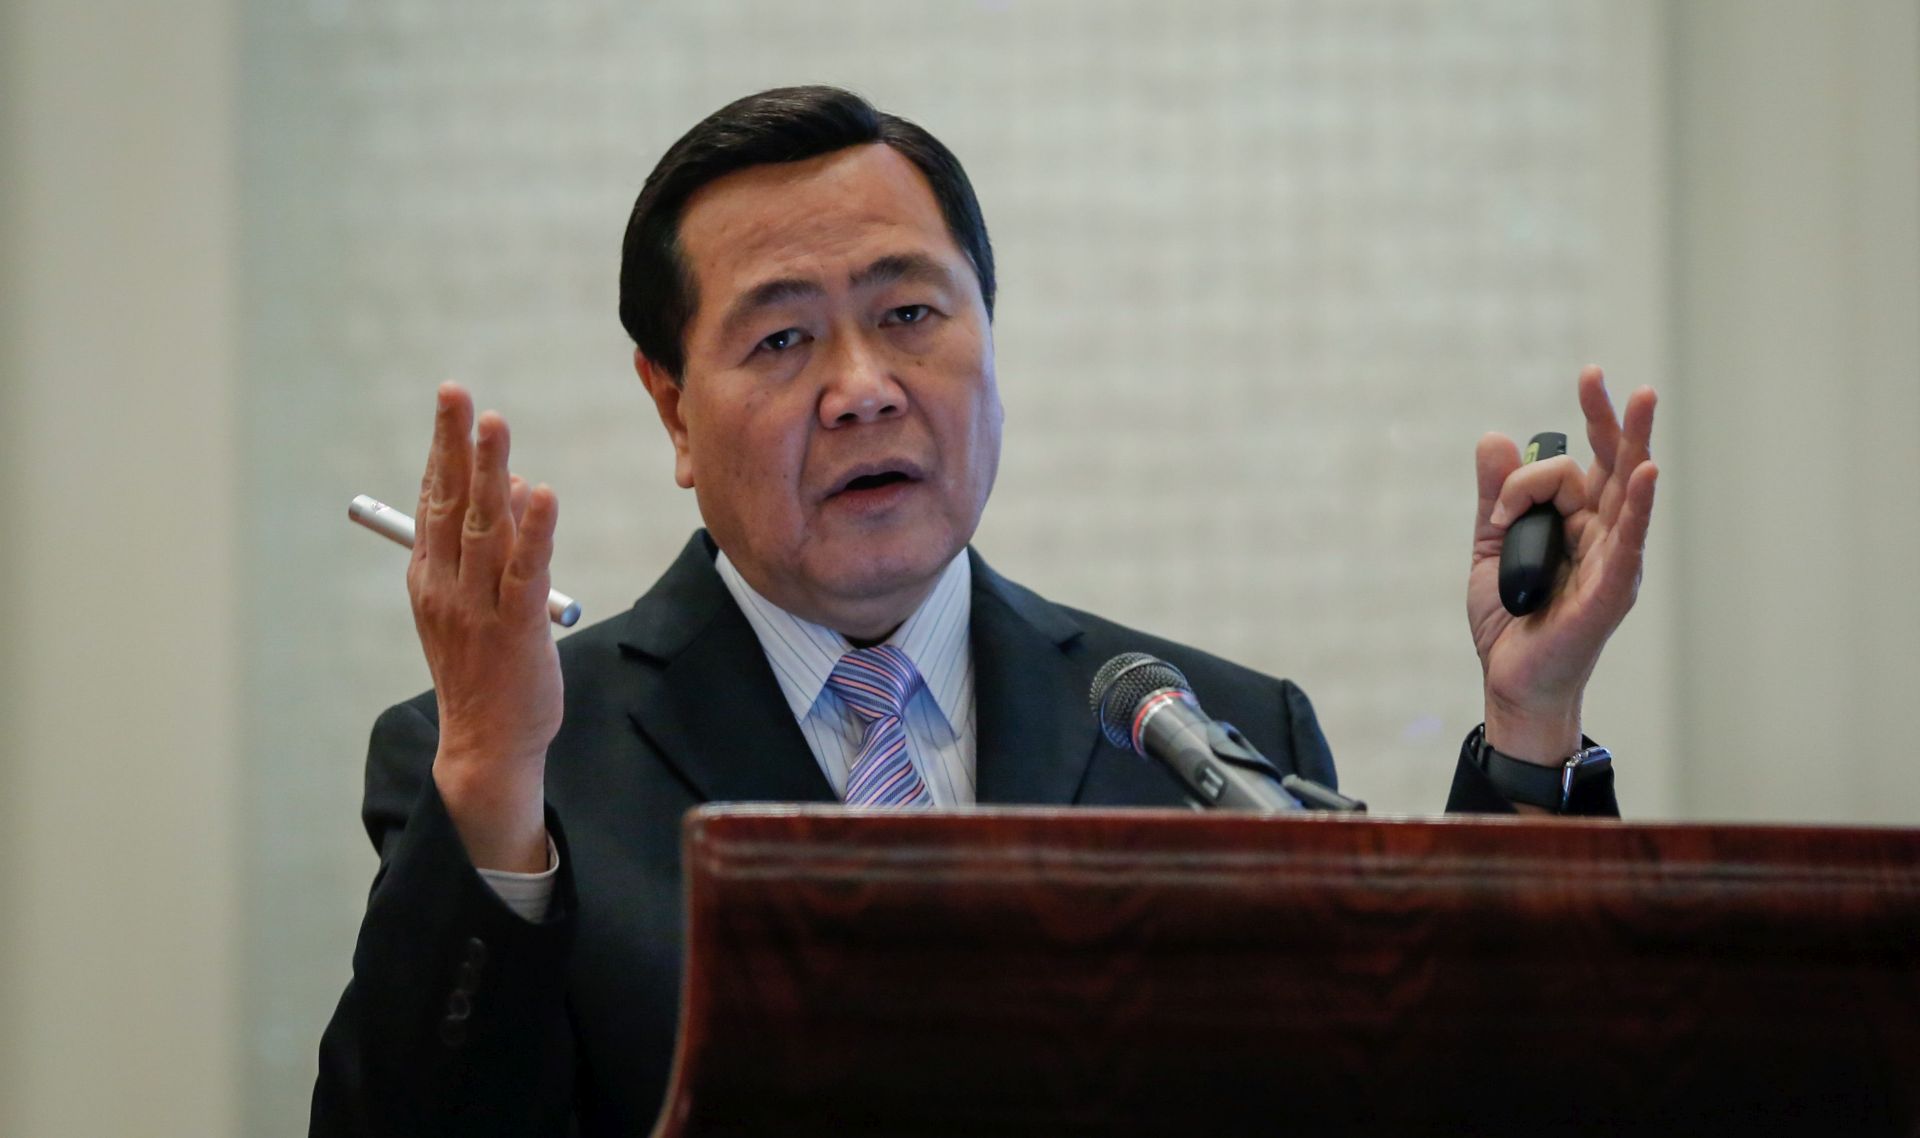 epa05372684 Filipino Supreme Court senior associate justice Antonio Carpio gestures while giving his lecture on the South China Sea dispute between the Philippines and China during the Manila Defense Symposium in Paranaque City, south of Manila, Philippines, 17 June 2016. The Philippines has an ongoing conflict with China over territories in the South China Sea. The Philippines has filed a case against China before an Arbitration Tribunal over several issues including the 9-dash line claim in the South China Sea. The Arbitration Tribunal is set to decide on the case in July 2016.  EPA/MARK R. CRISTINO